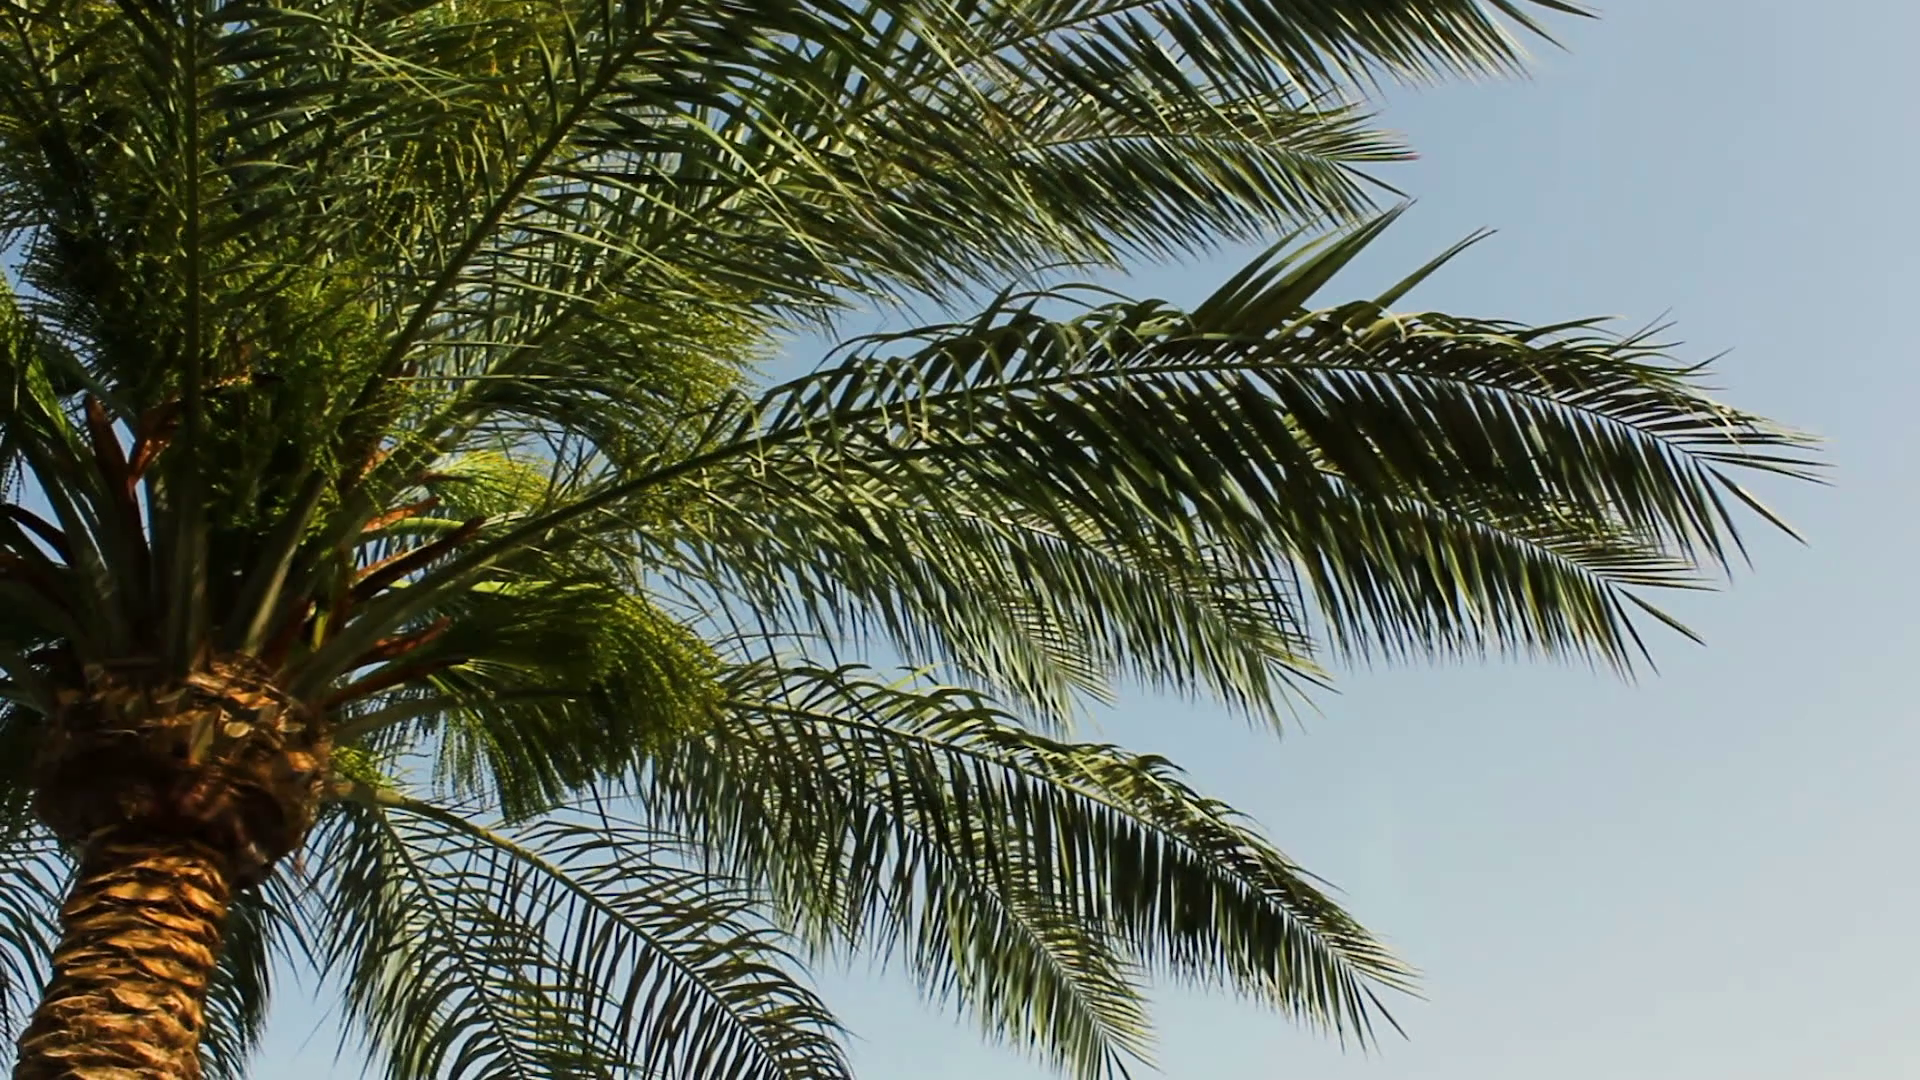 Large green leaves of a palm tree swing from the wind against a blue ...